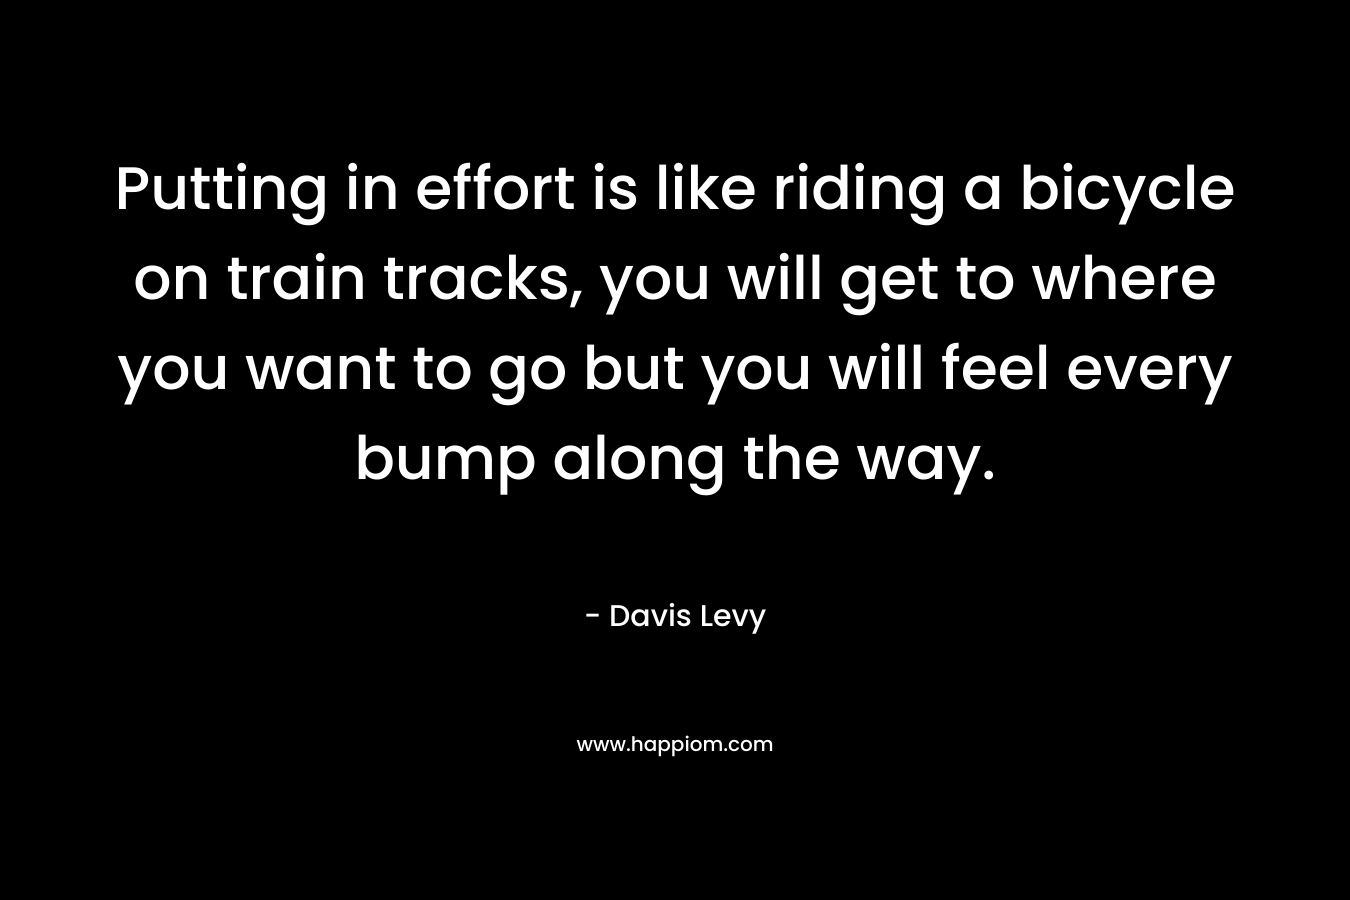 Putting in effort is like riding a bicycle on train tracks, you will get to where you want to go but you will feel every bump along the way.